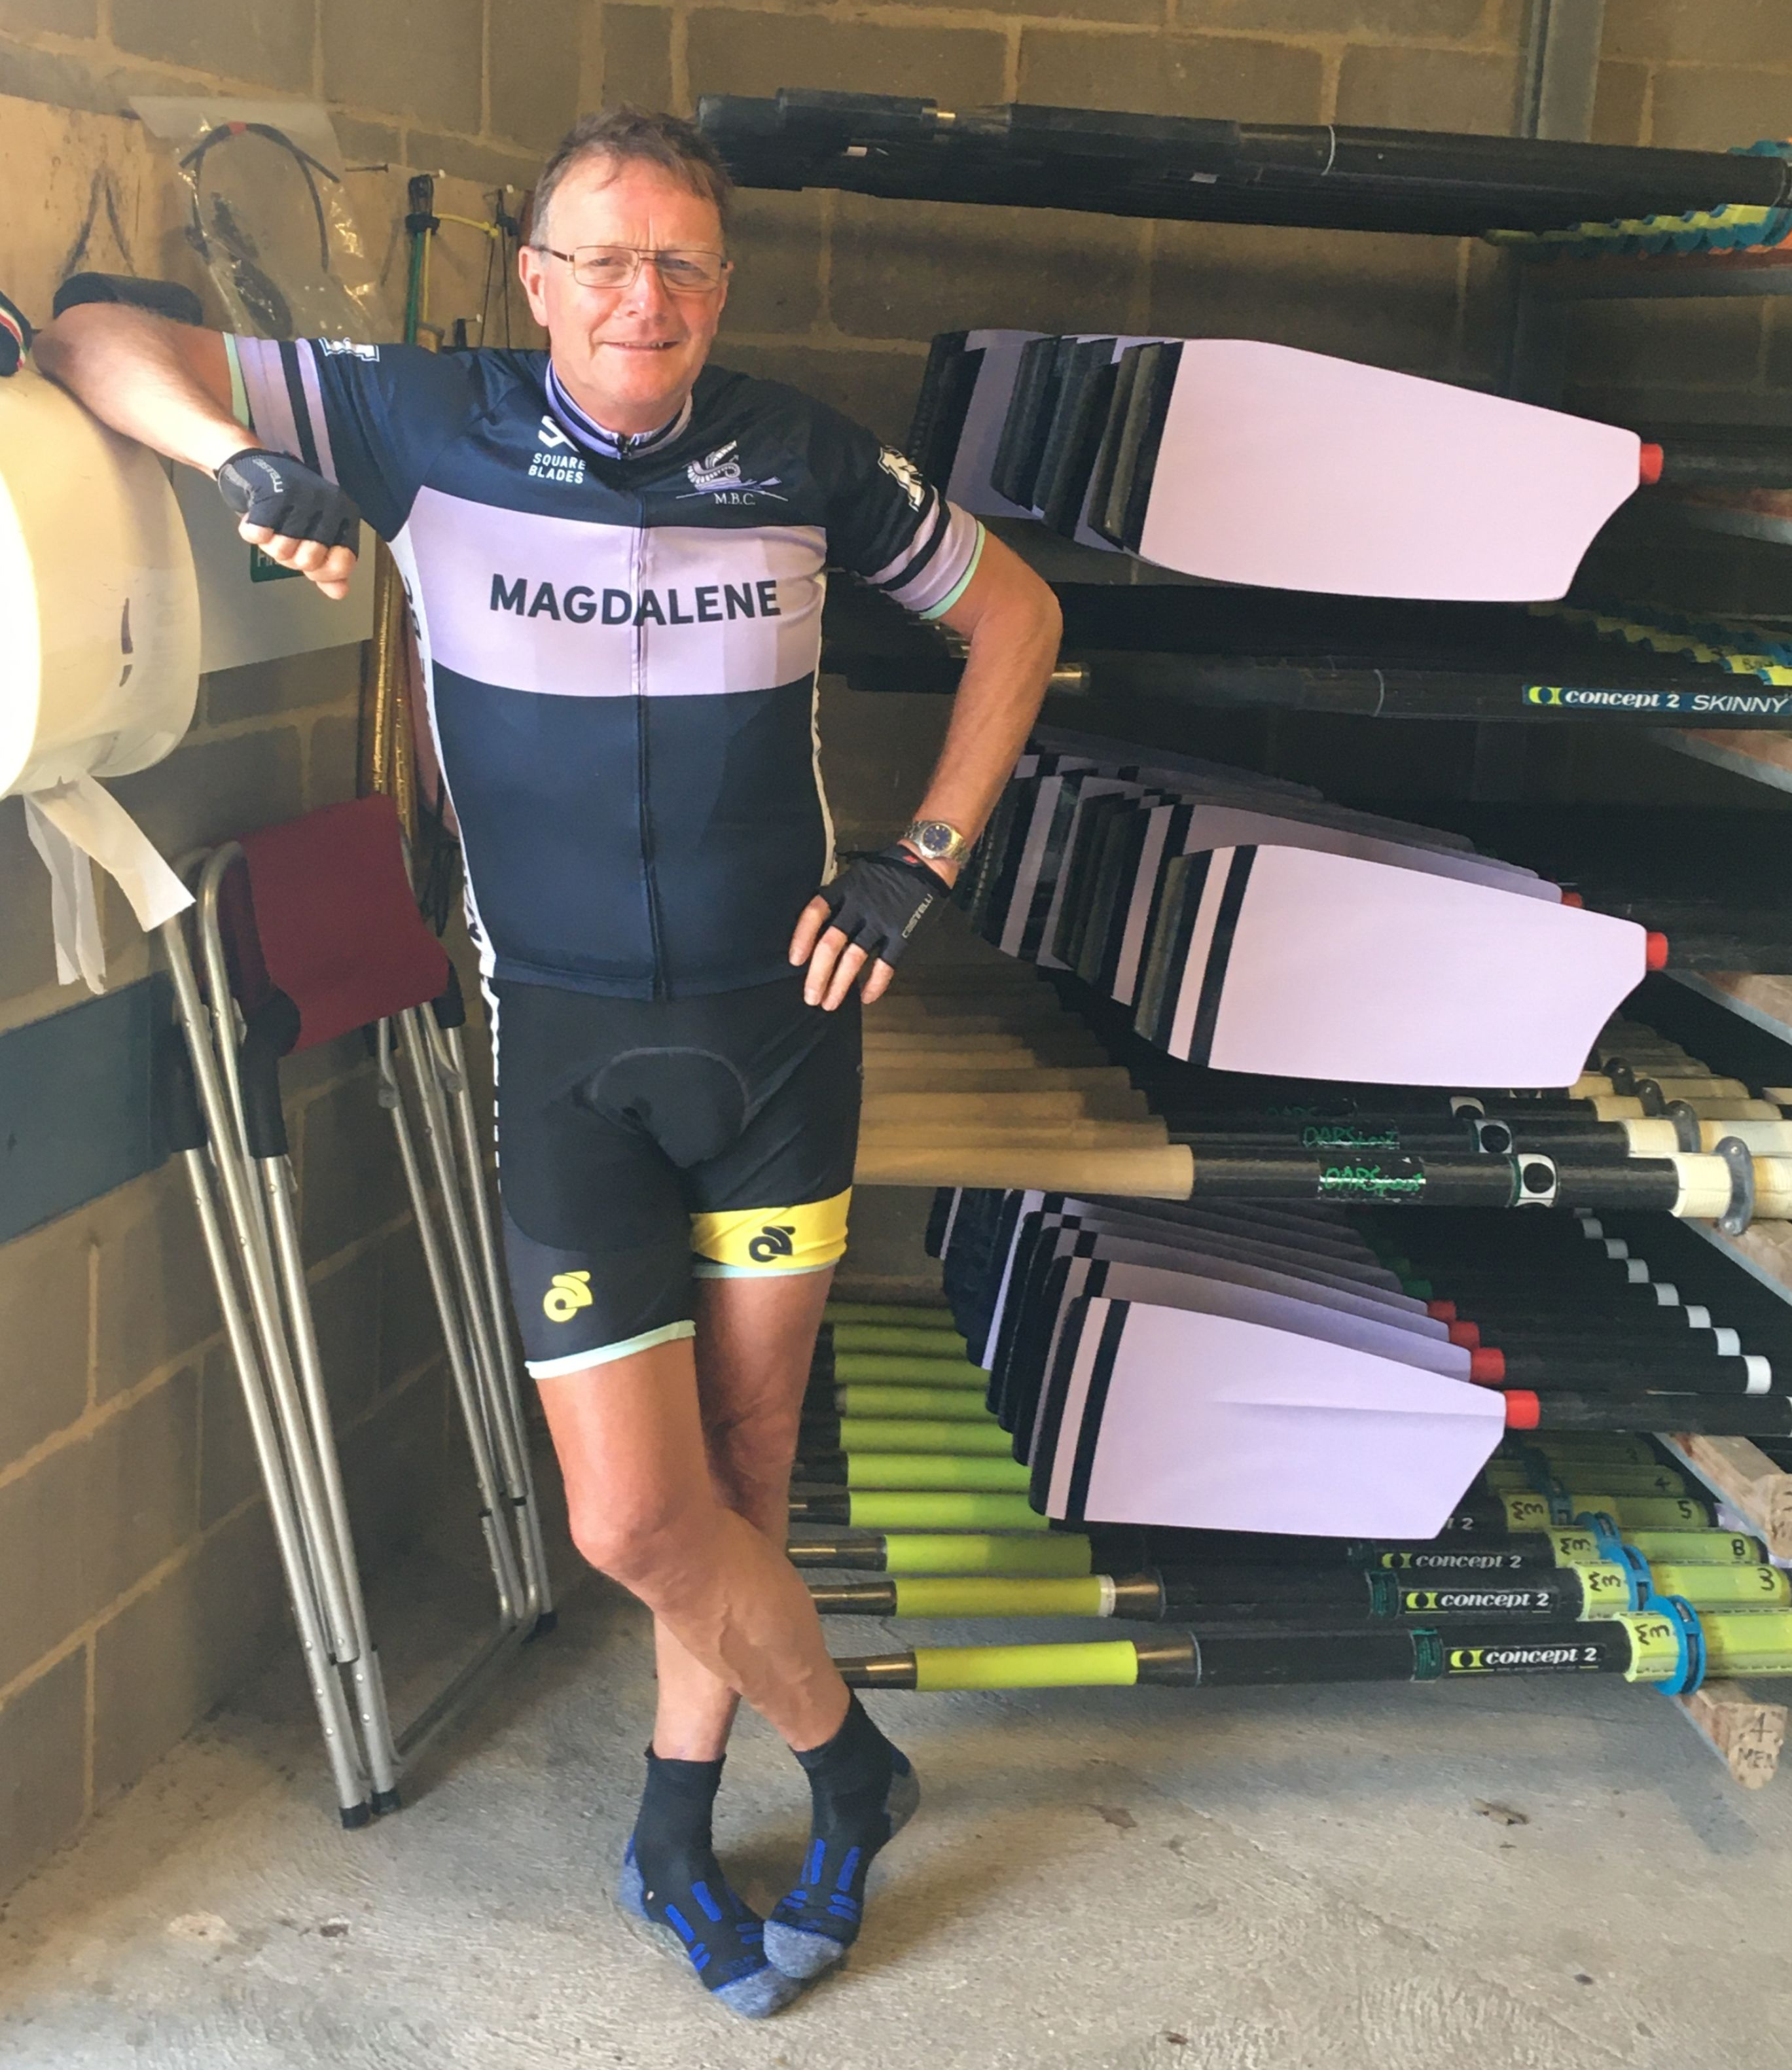 Paul Knights modelling the new MBC cycling jersey in Club colours with some newly painted blades in original MBC colours